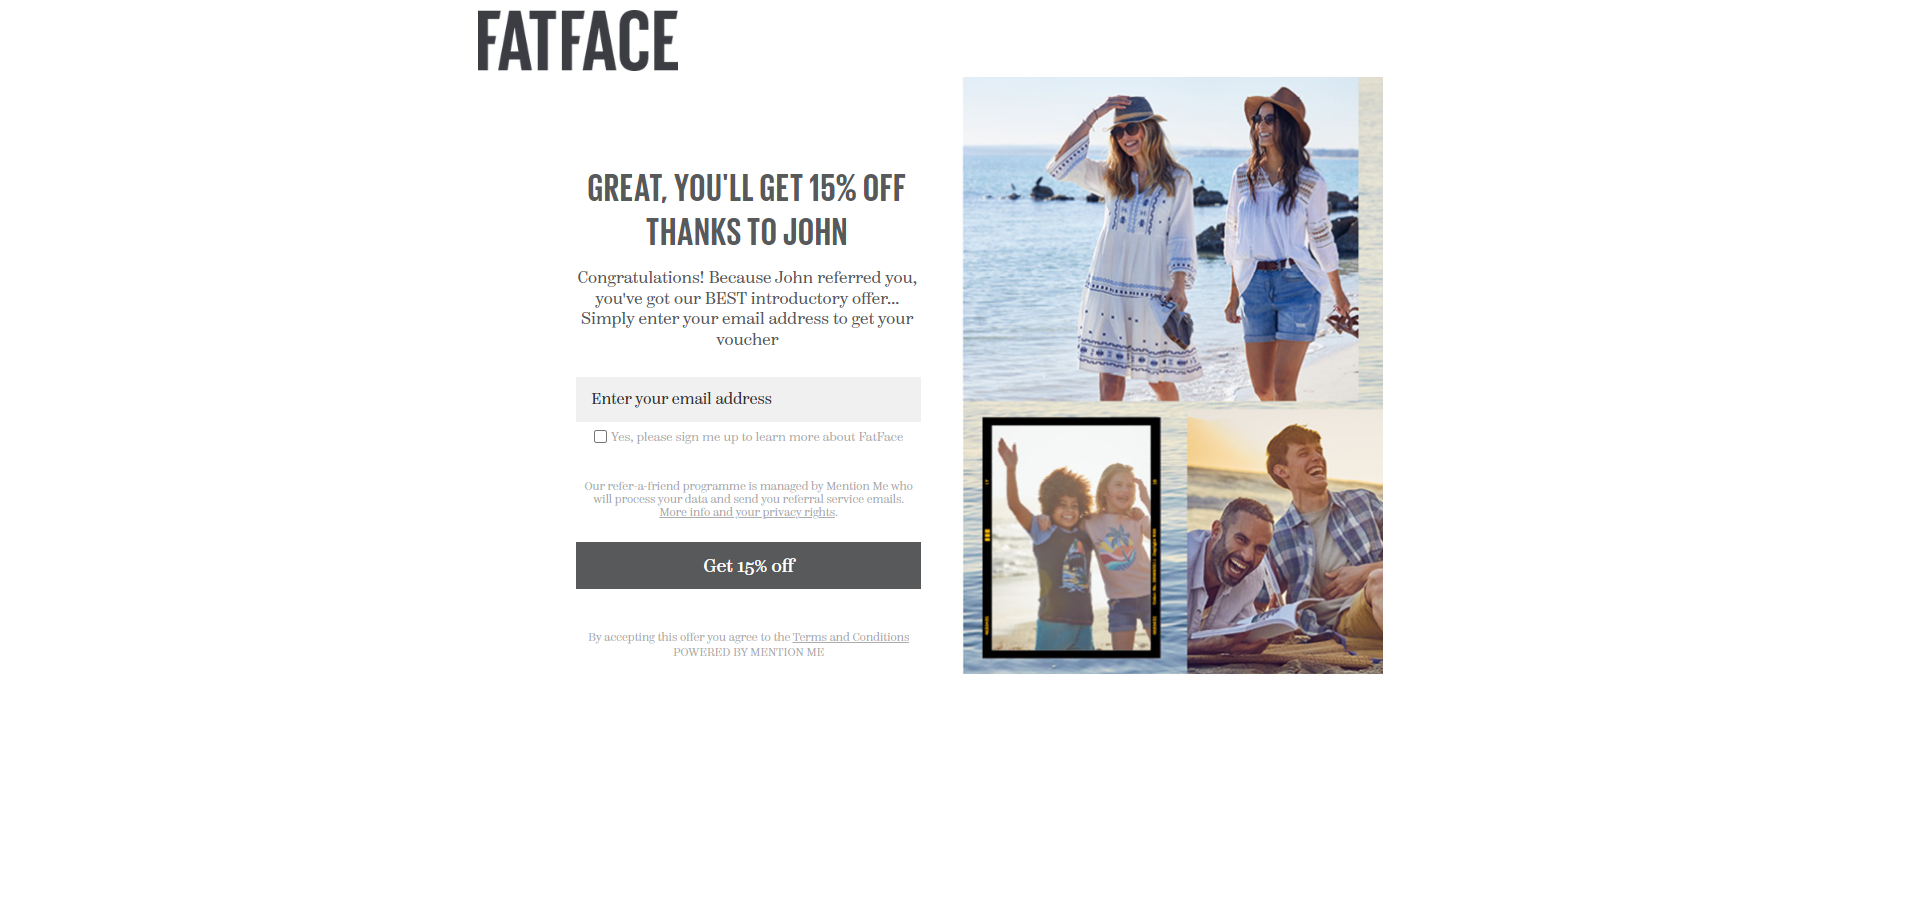 Referral Landing Page for Fatface